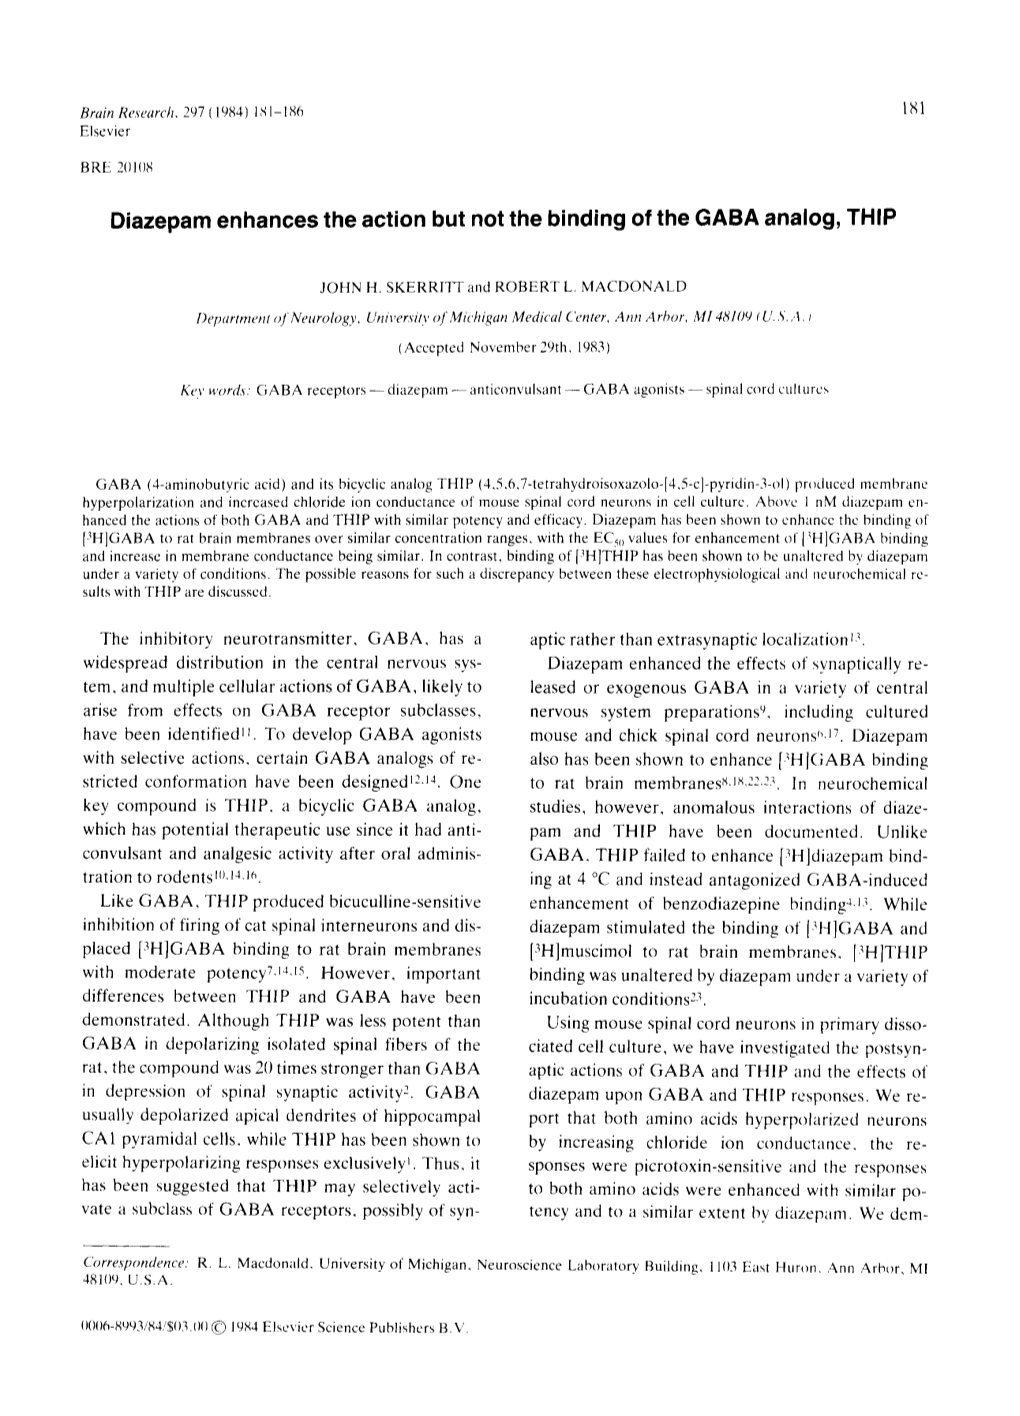 Diazepam Enhances the Action but Not the Binding of the GABA Analog, THIP